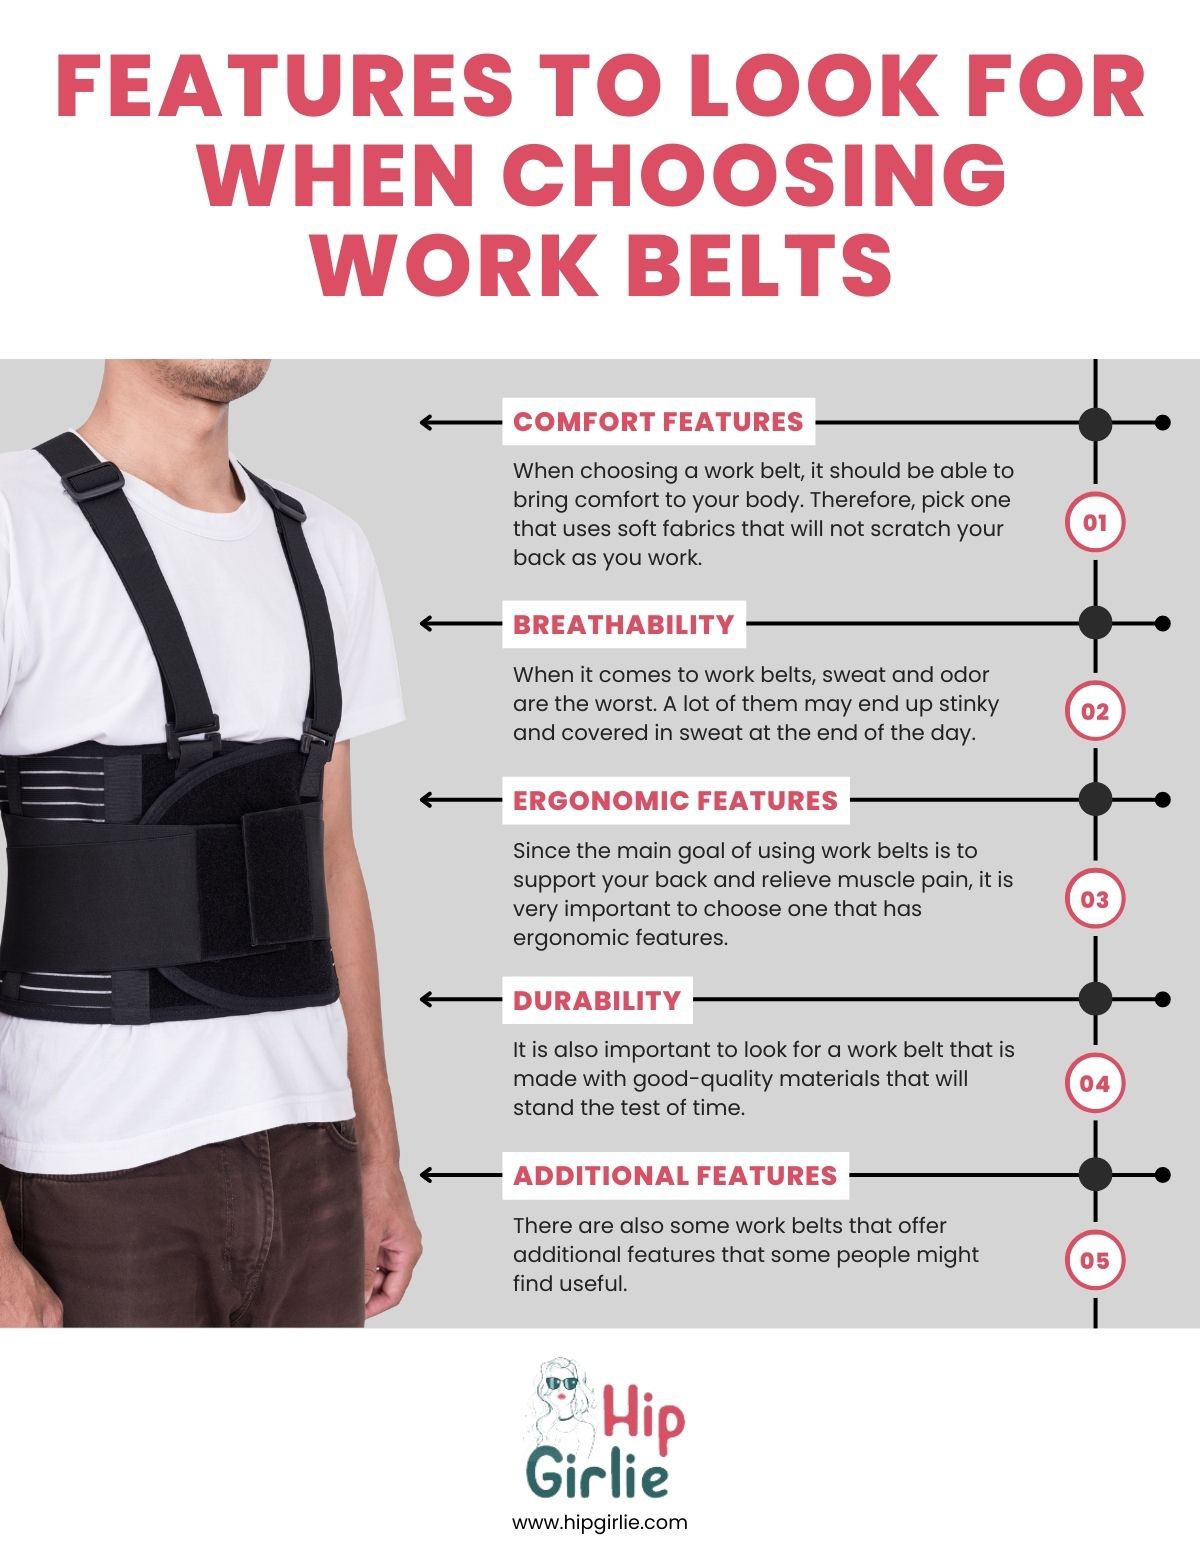 Features to Look For When Choosing Work Belts